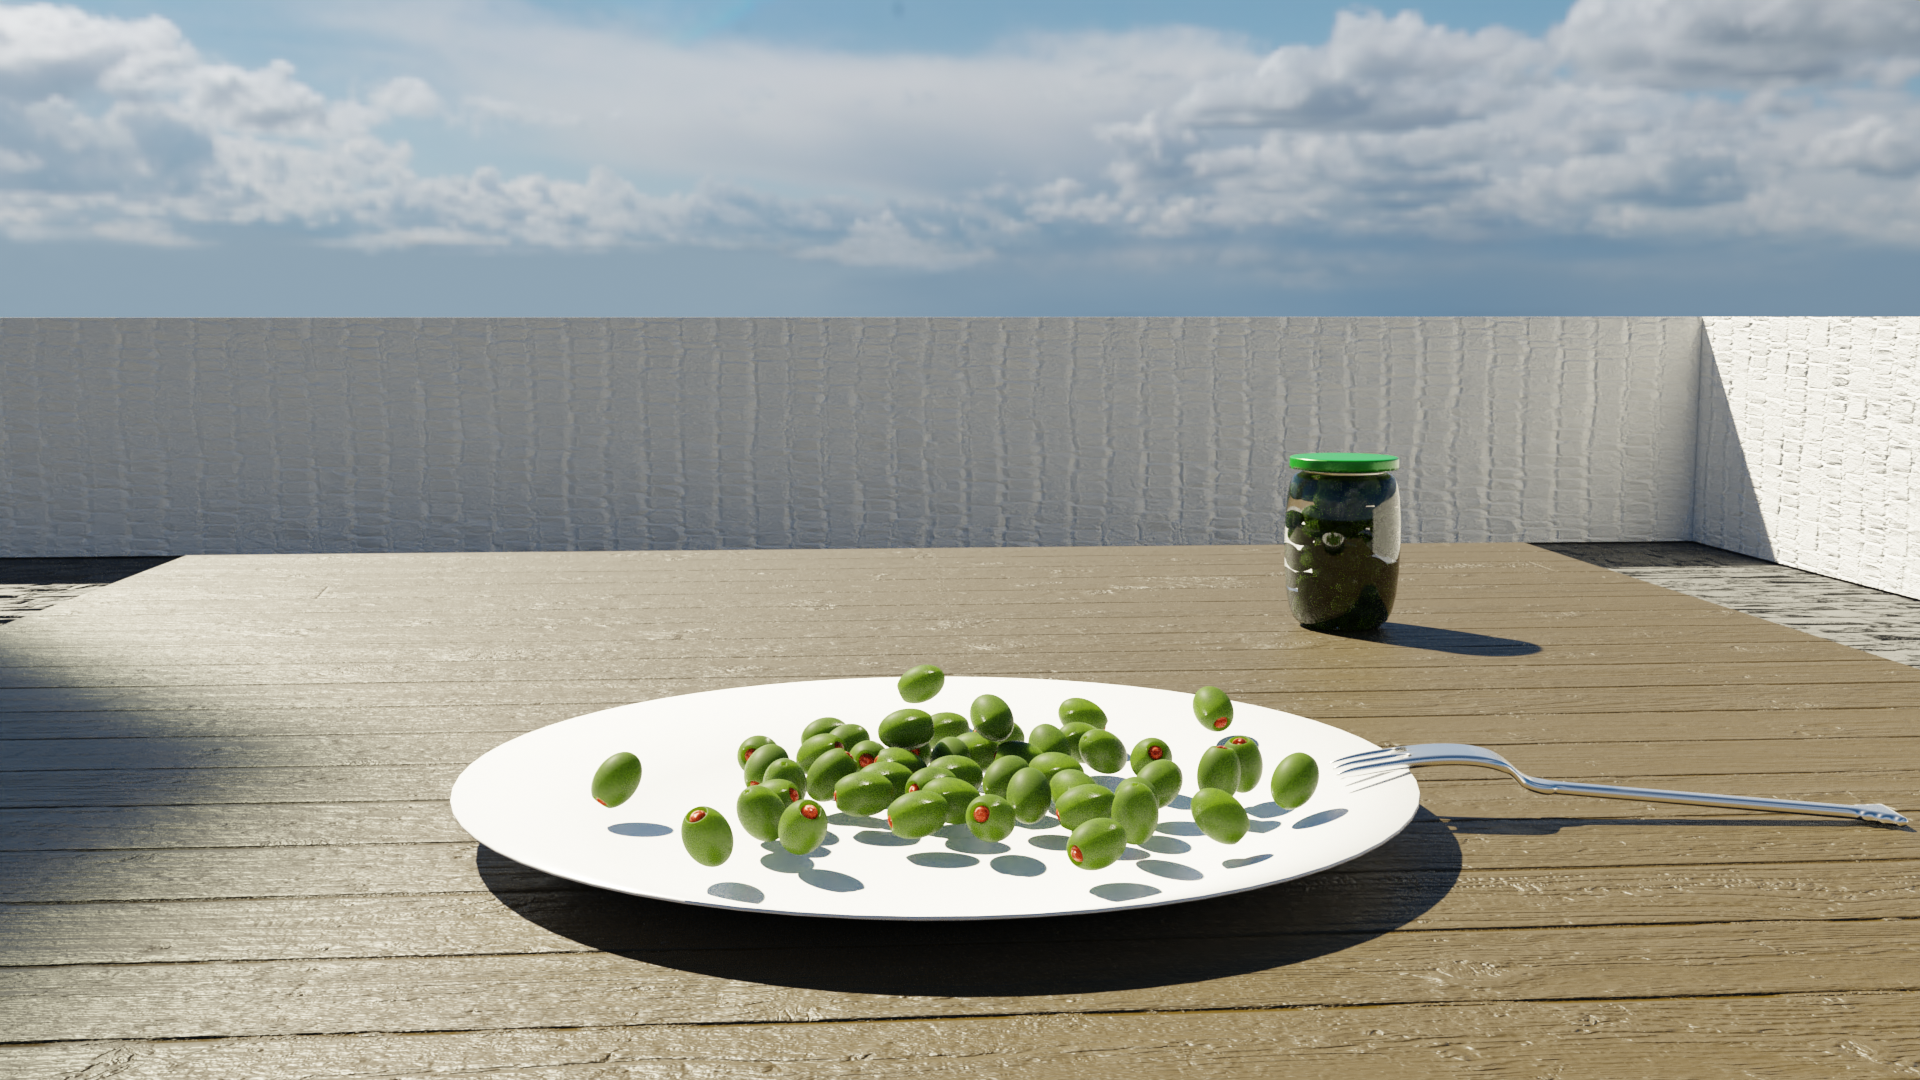 Olives on a plate!